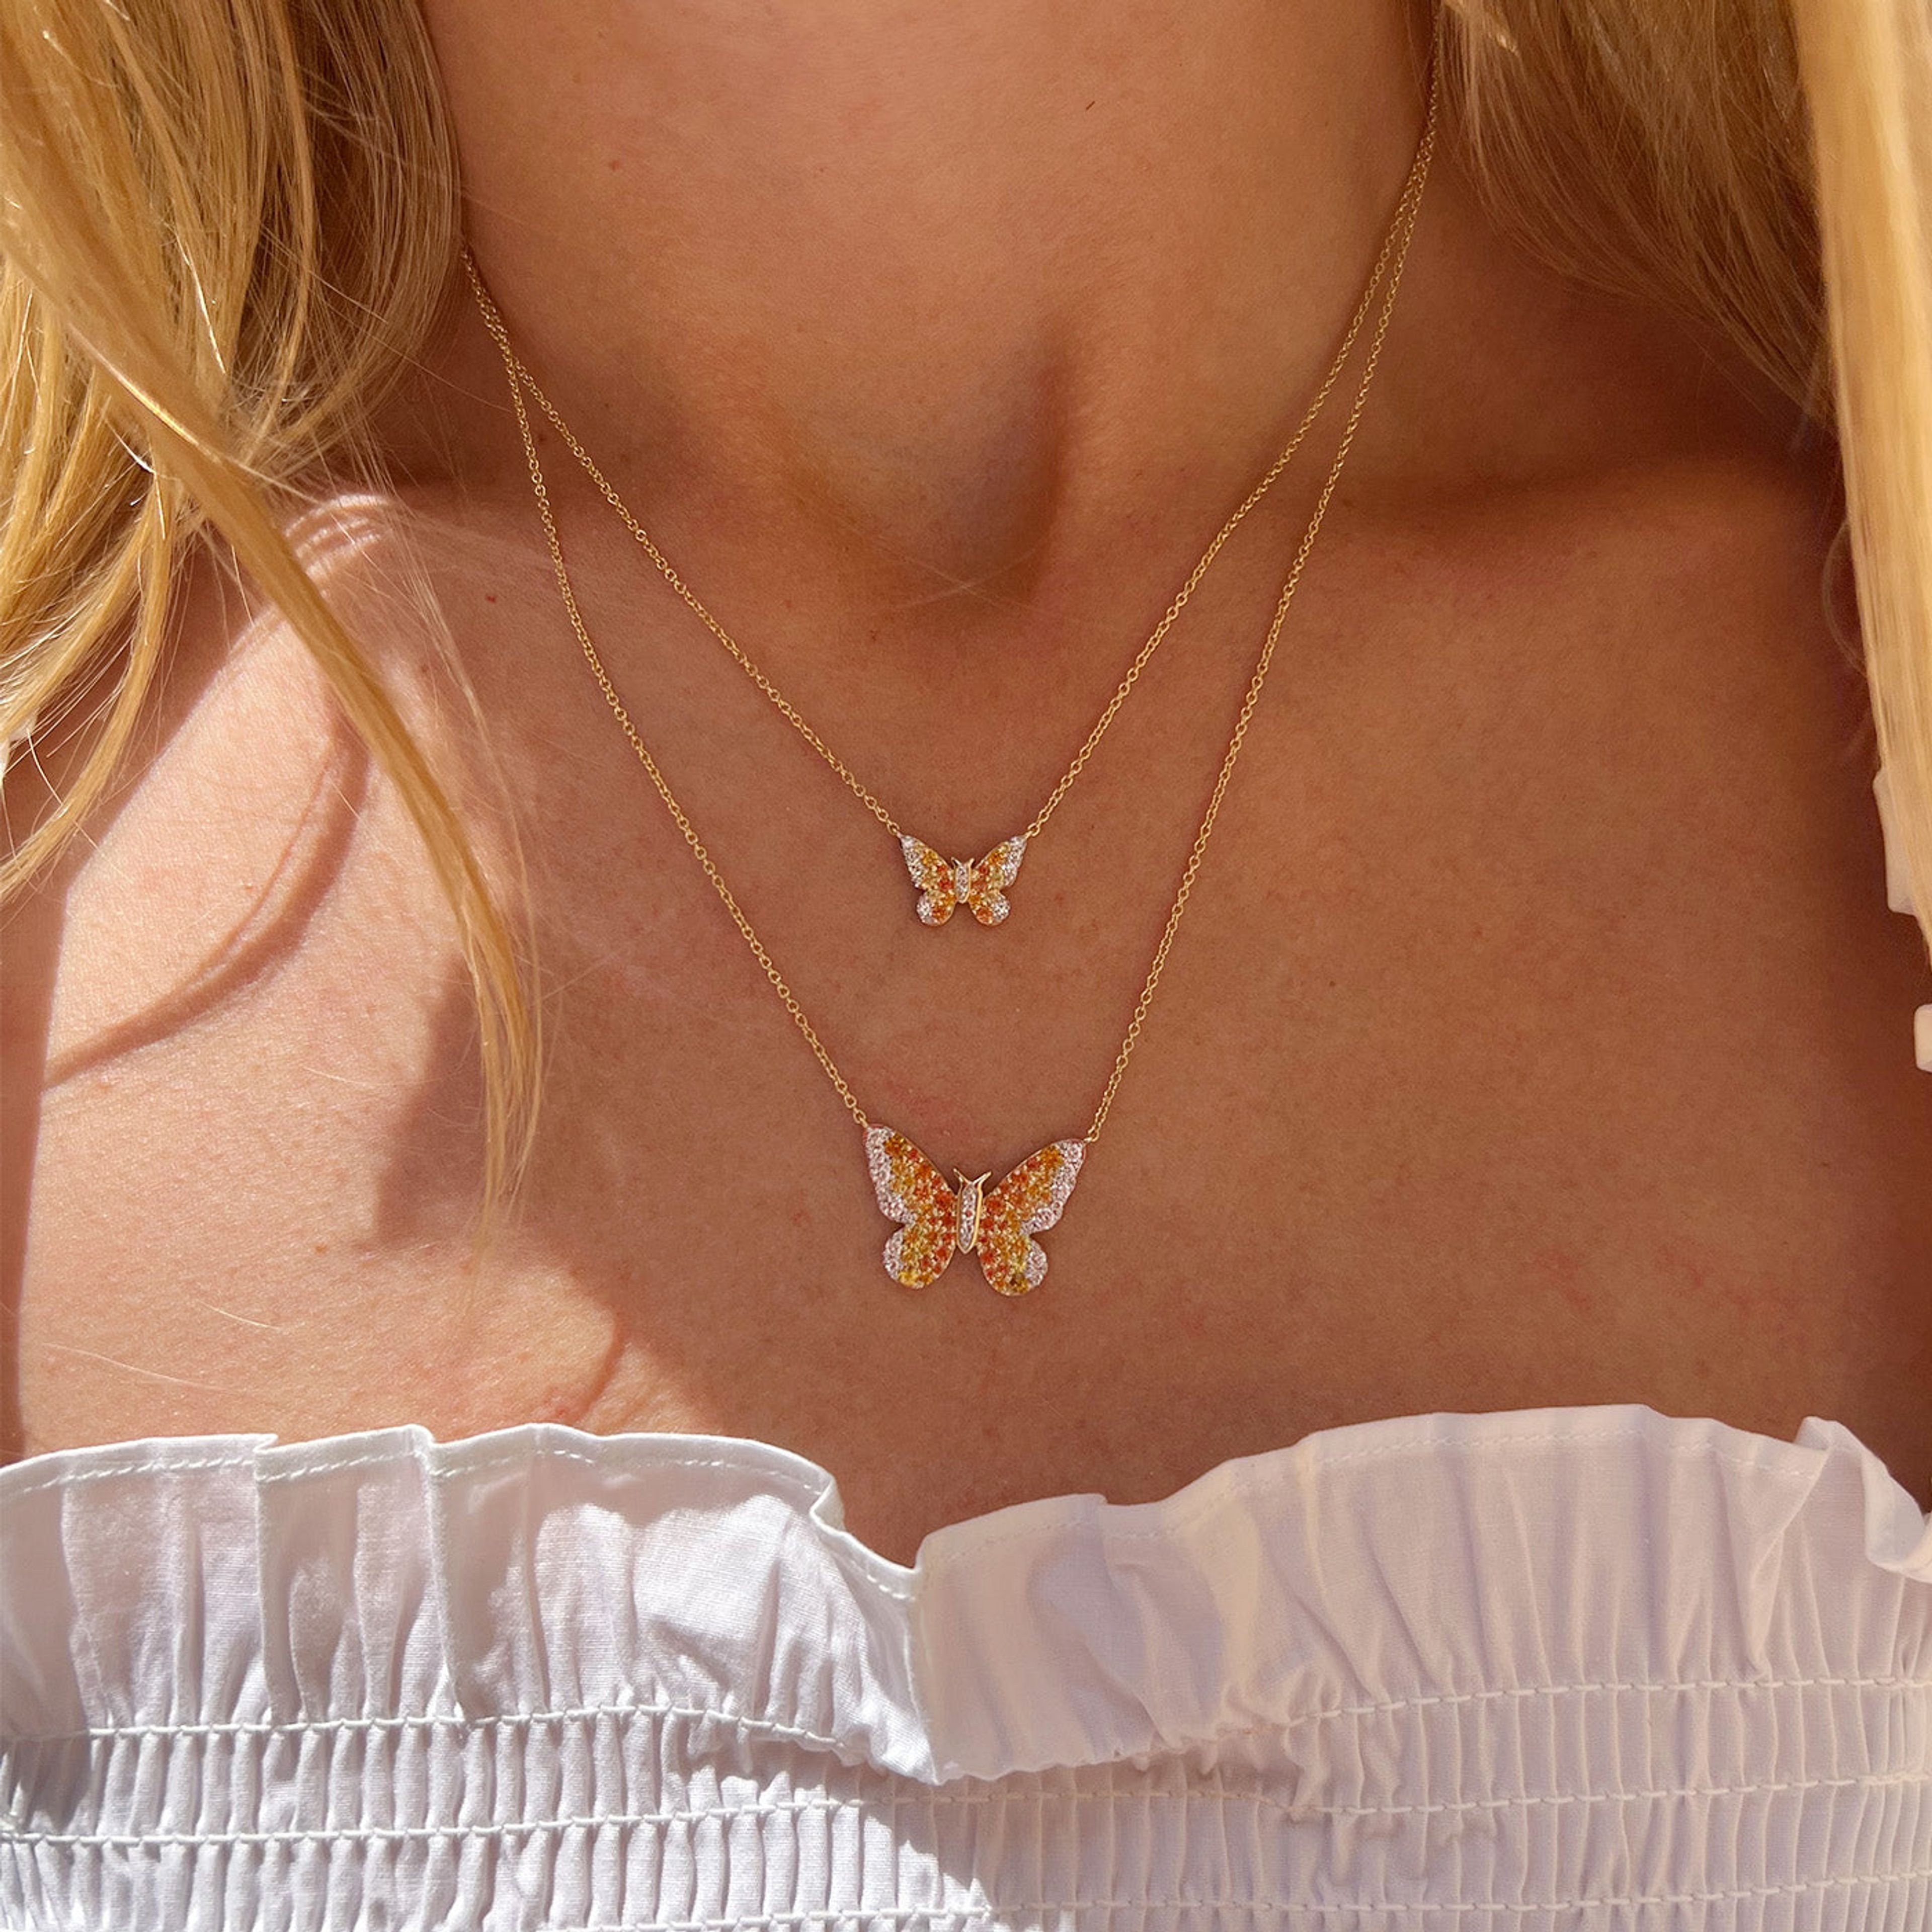 Mini Yellow and Diamond Ombré Butterfly Necklace